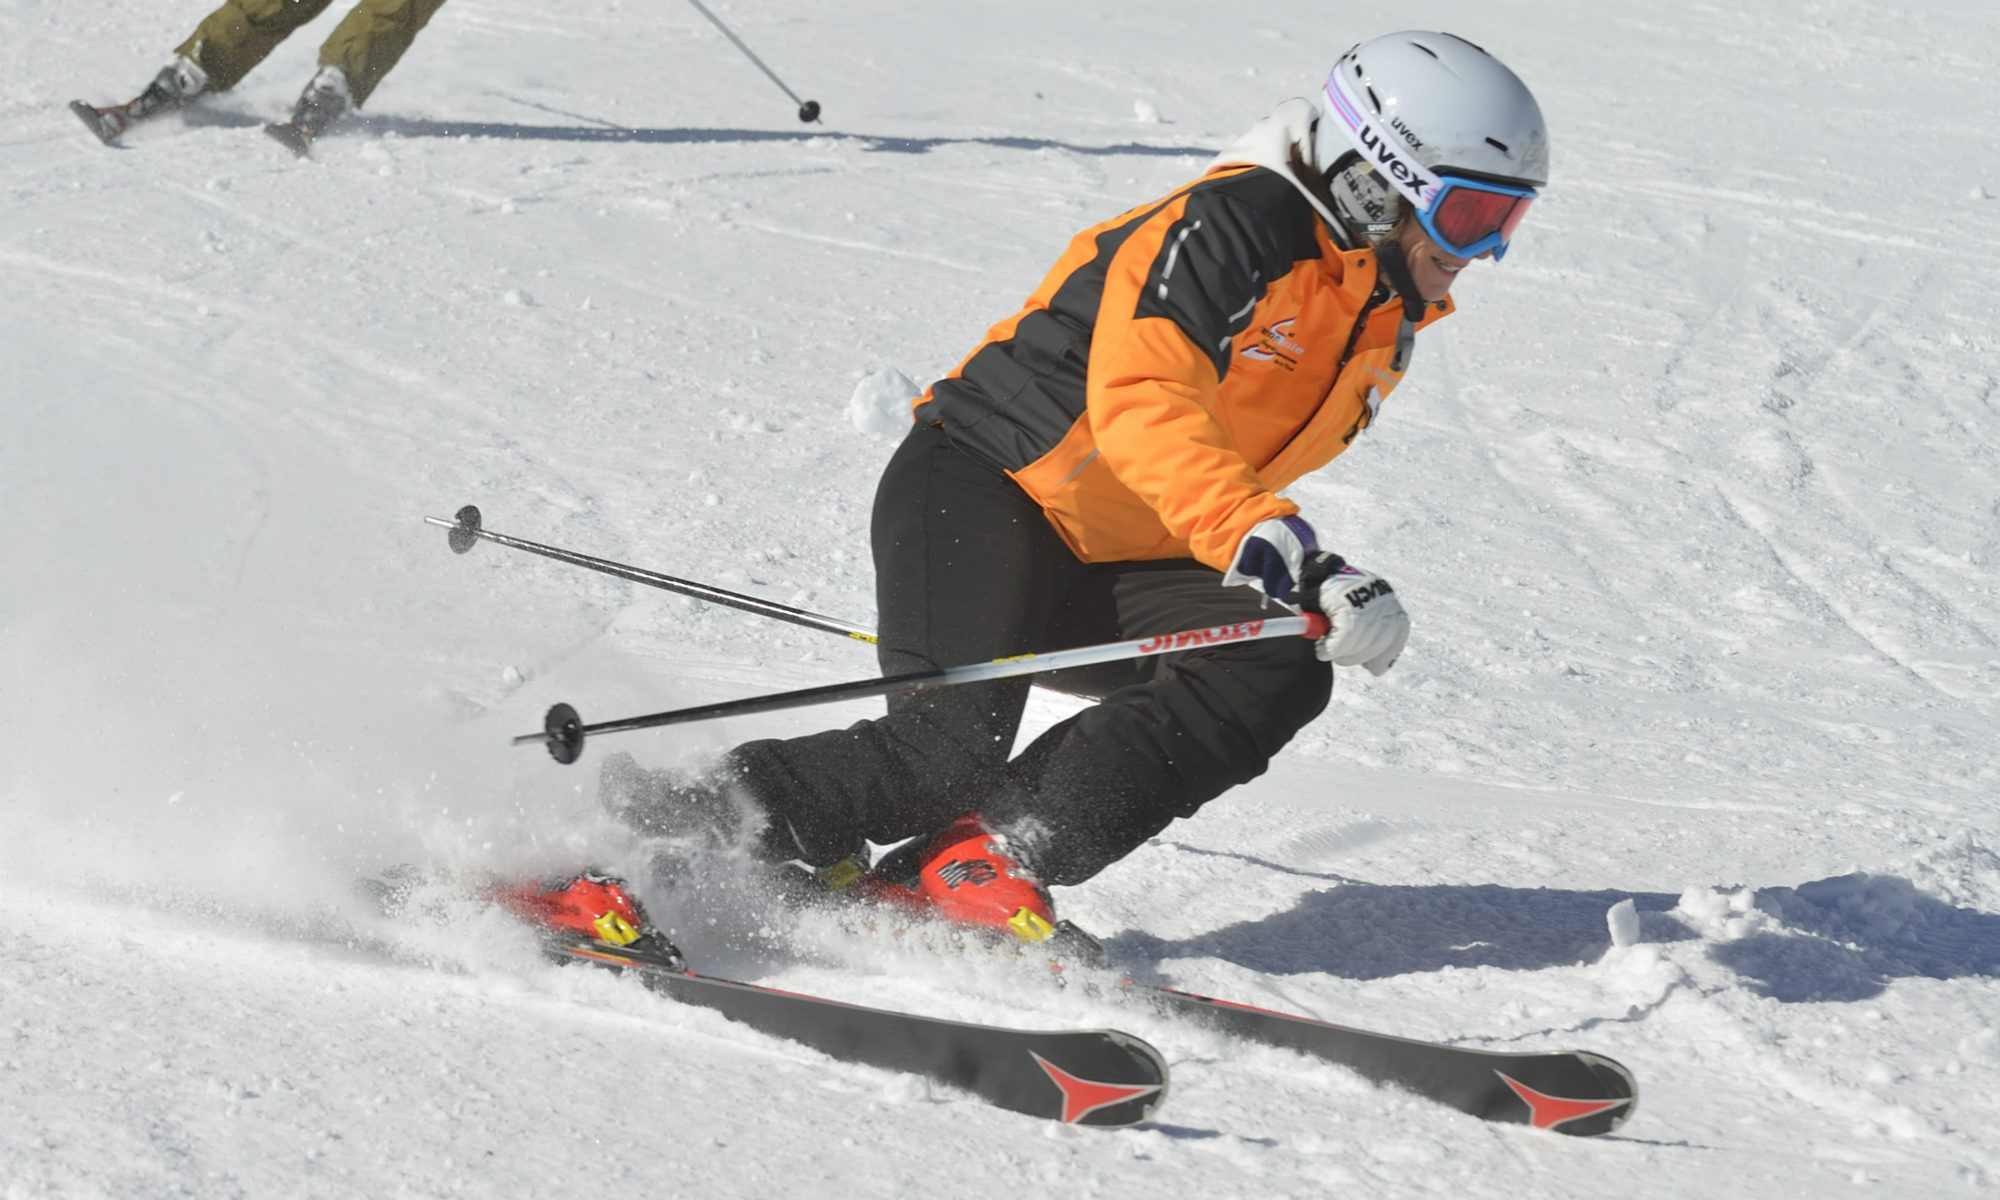 A professional skier demonstrating edging.